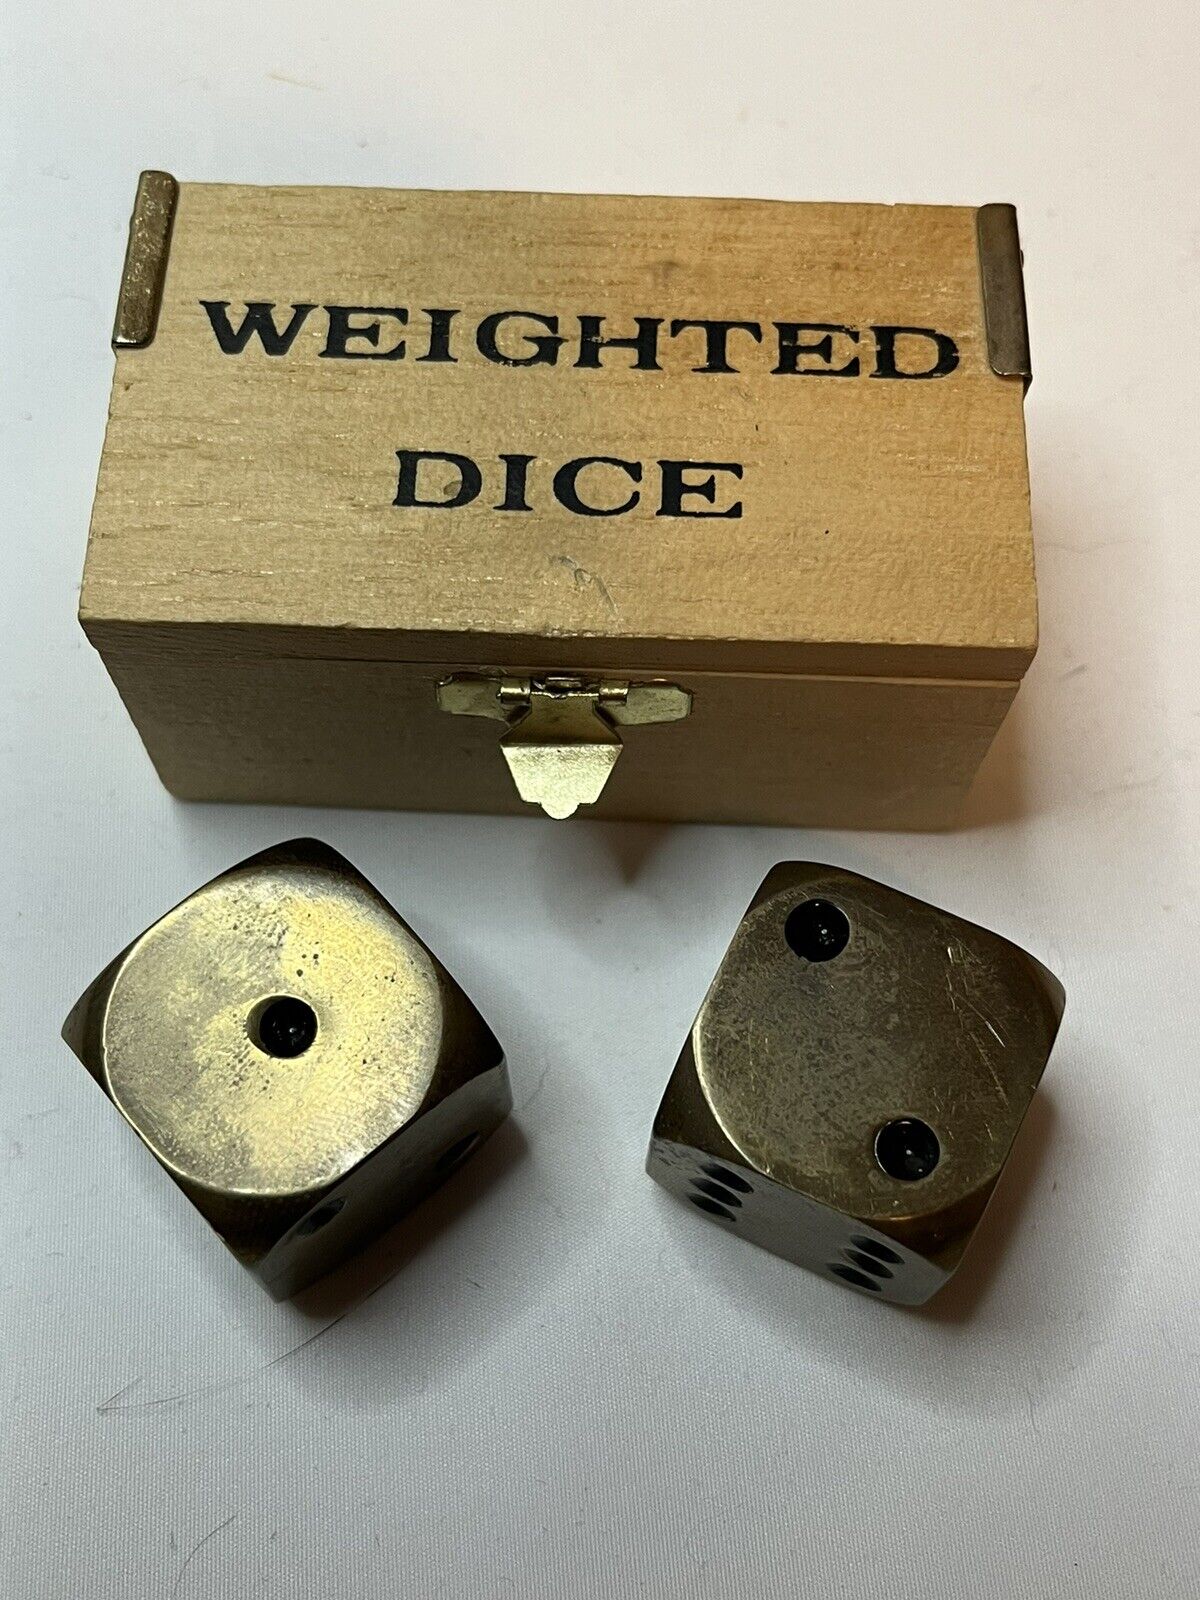 Vintage Weighted Dice  Wood Box Case Old Larger Sized Brass Dice 1 Inch